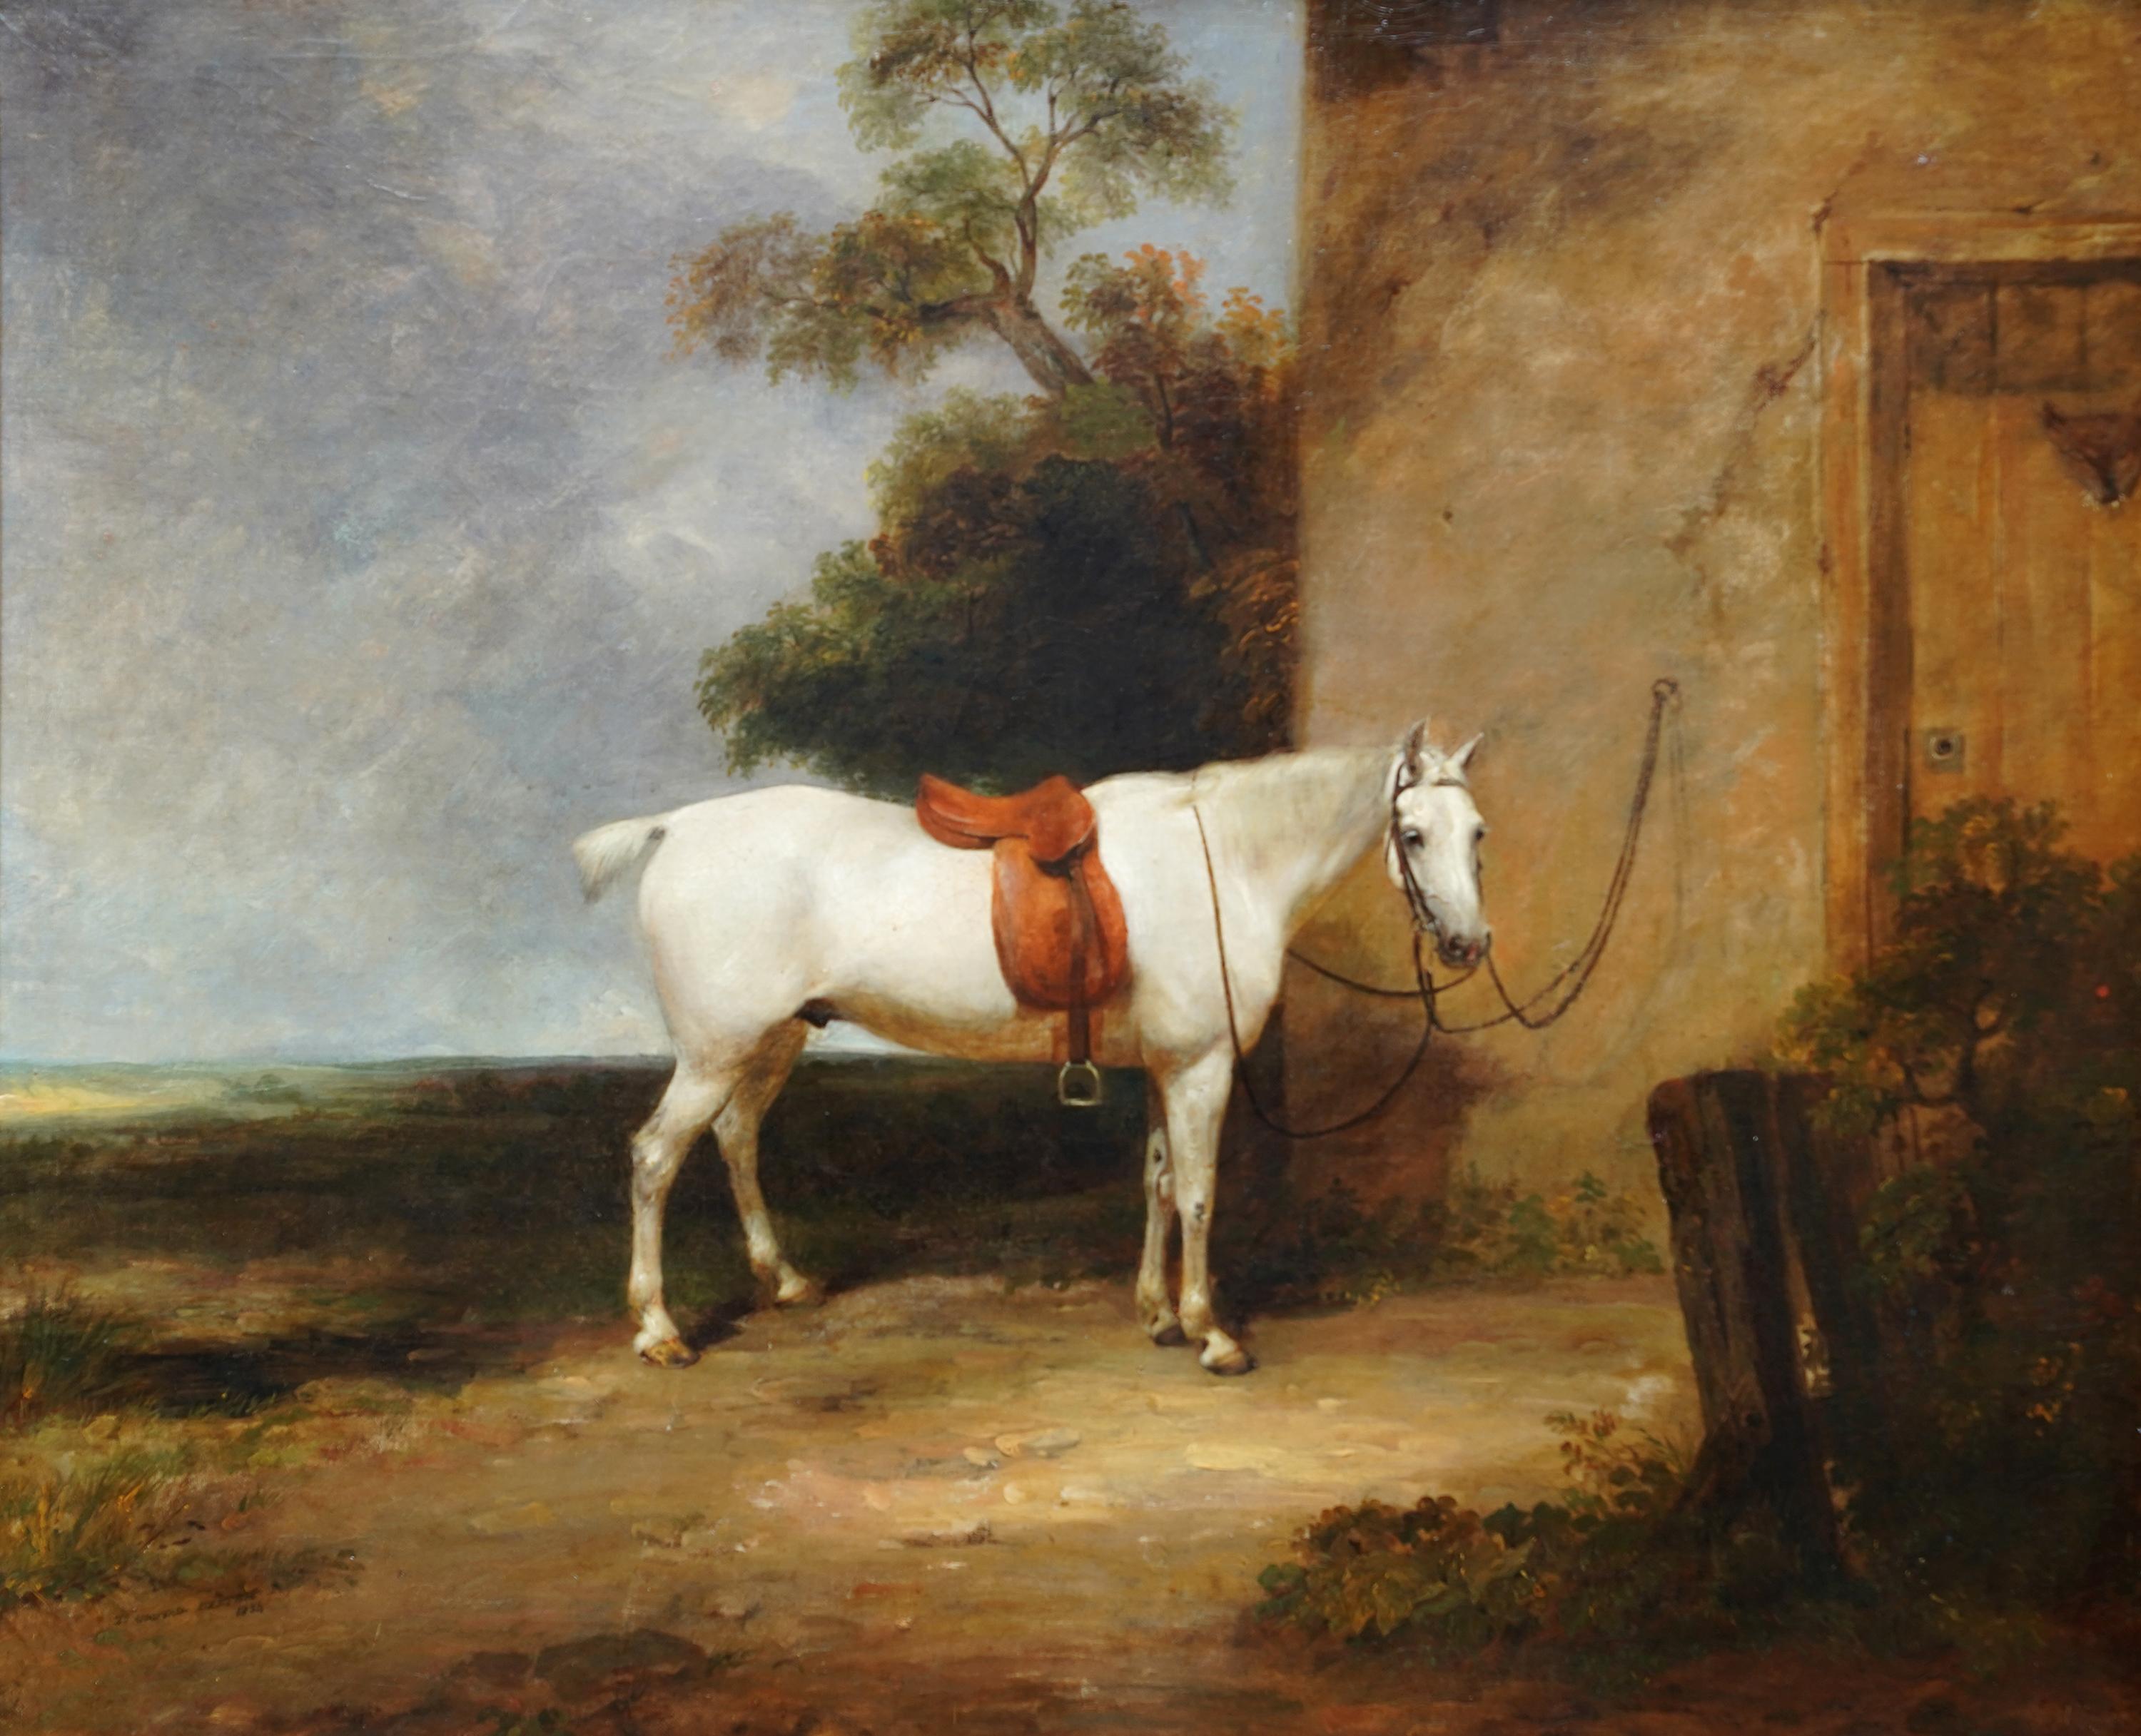 Portrait of a Hunter Horse in a Landscape - British Old Master art oil painting For Sale 5